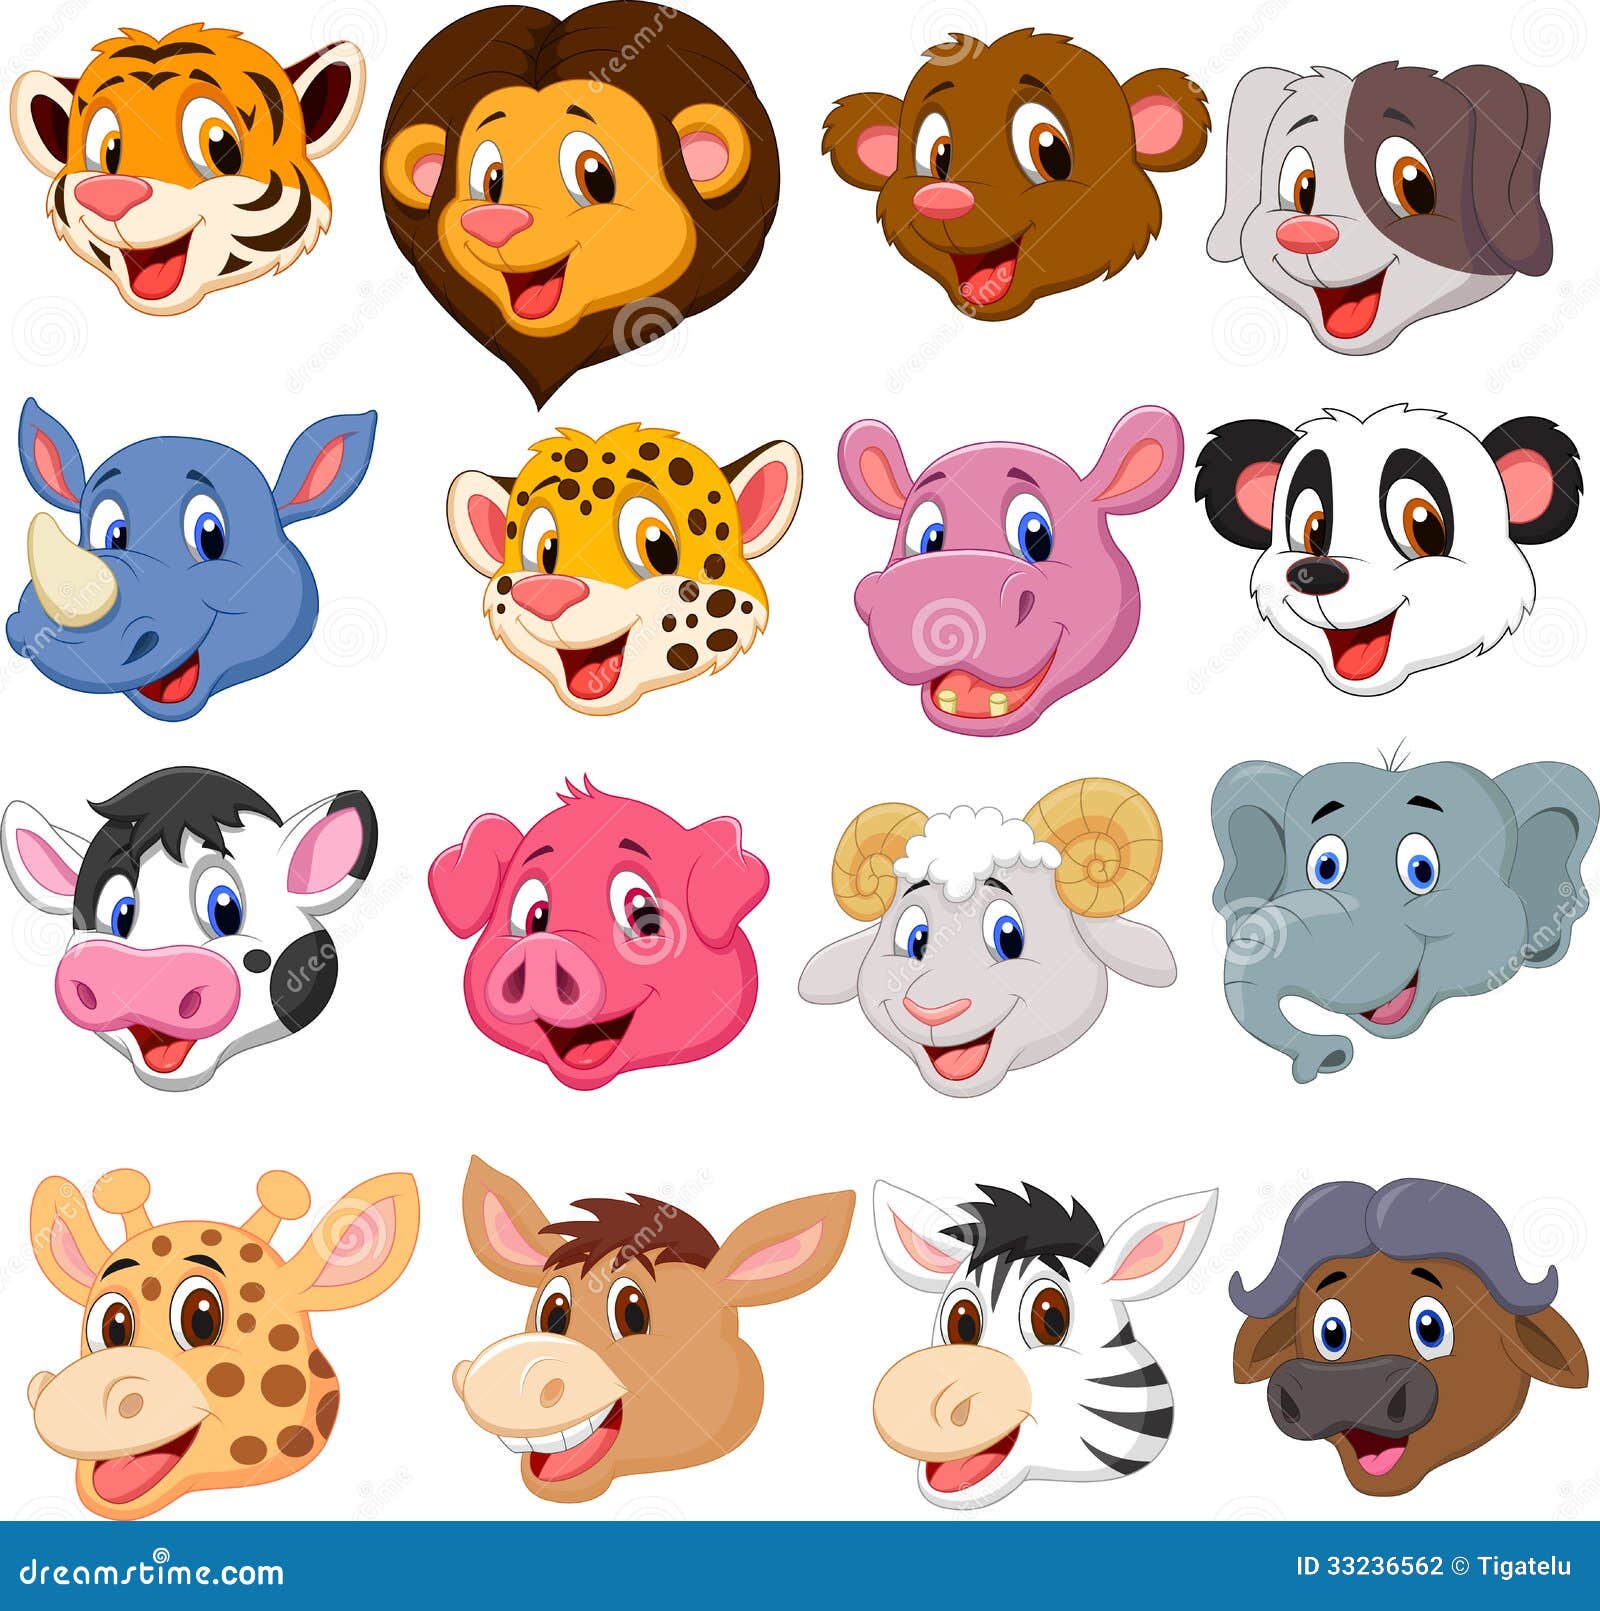 Cartoon Animal Head Collection Set Stock Vector - Illustration of doodle,  character: 33236562